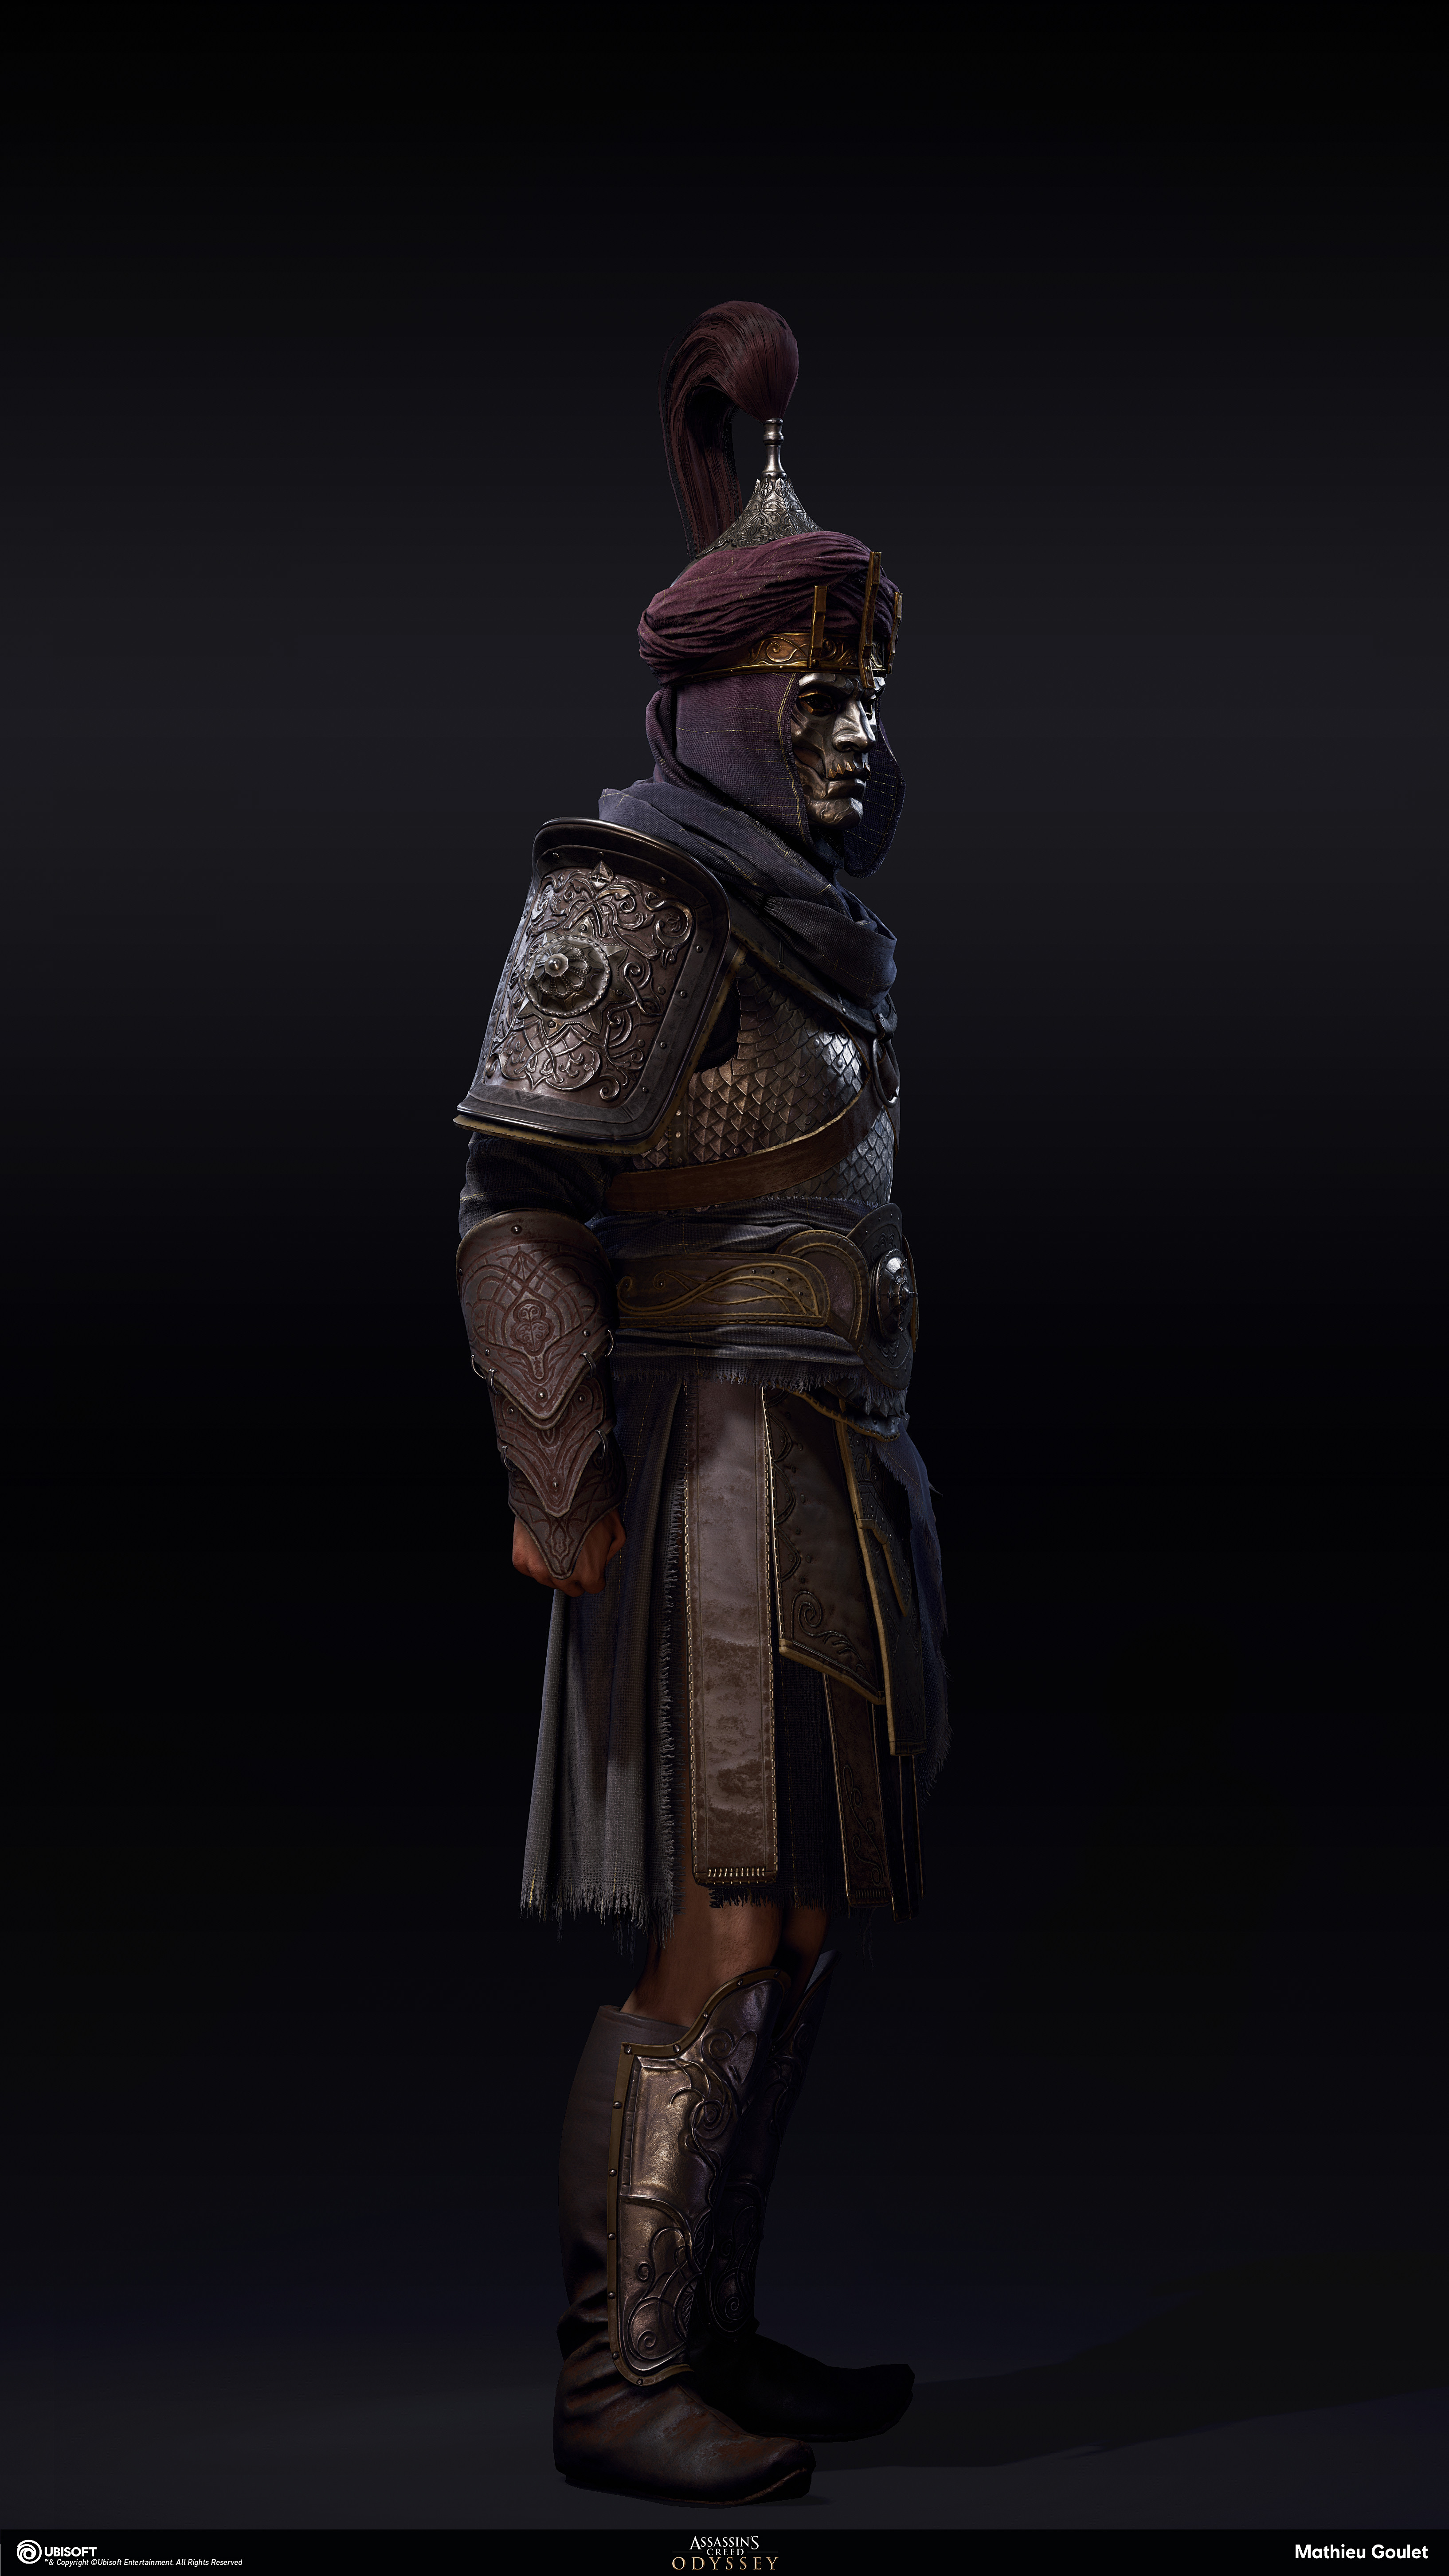 ArtStation - Assassin's Creed Odyssey : Iconic Outfit, Mathieu